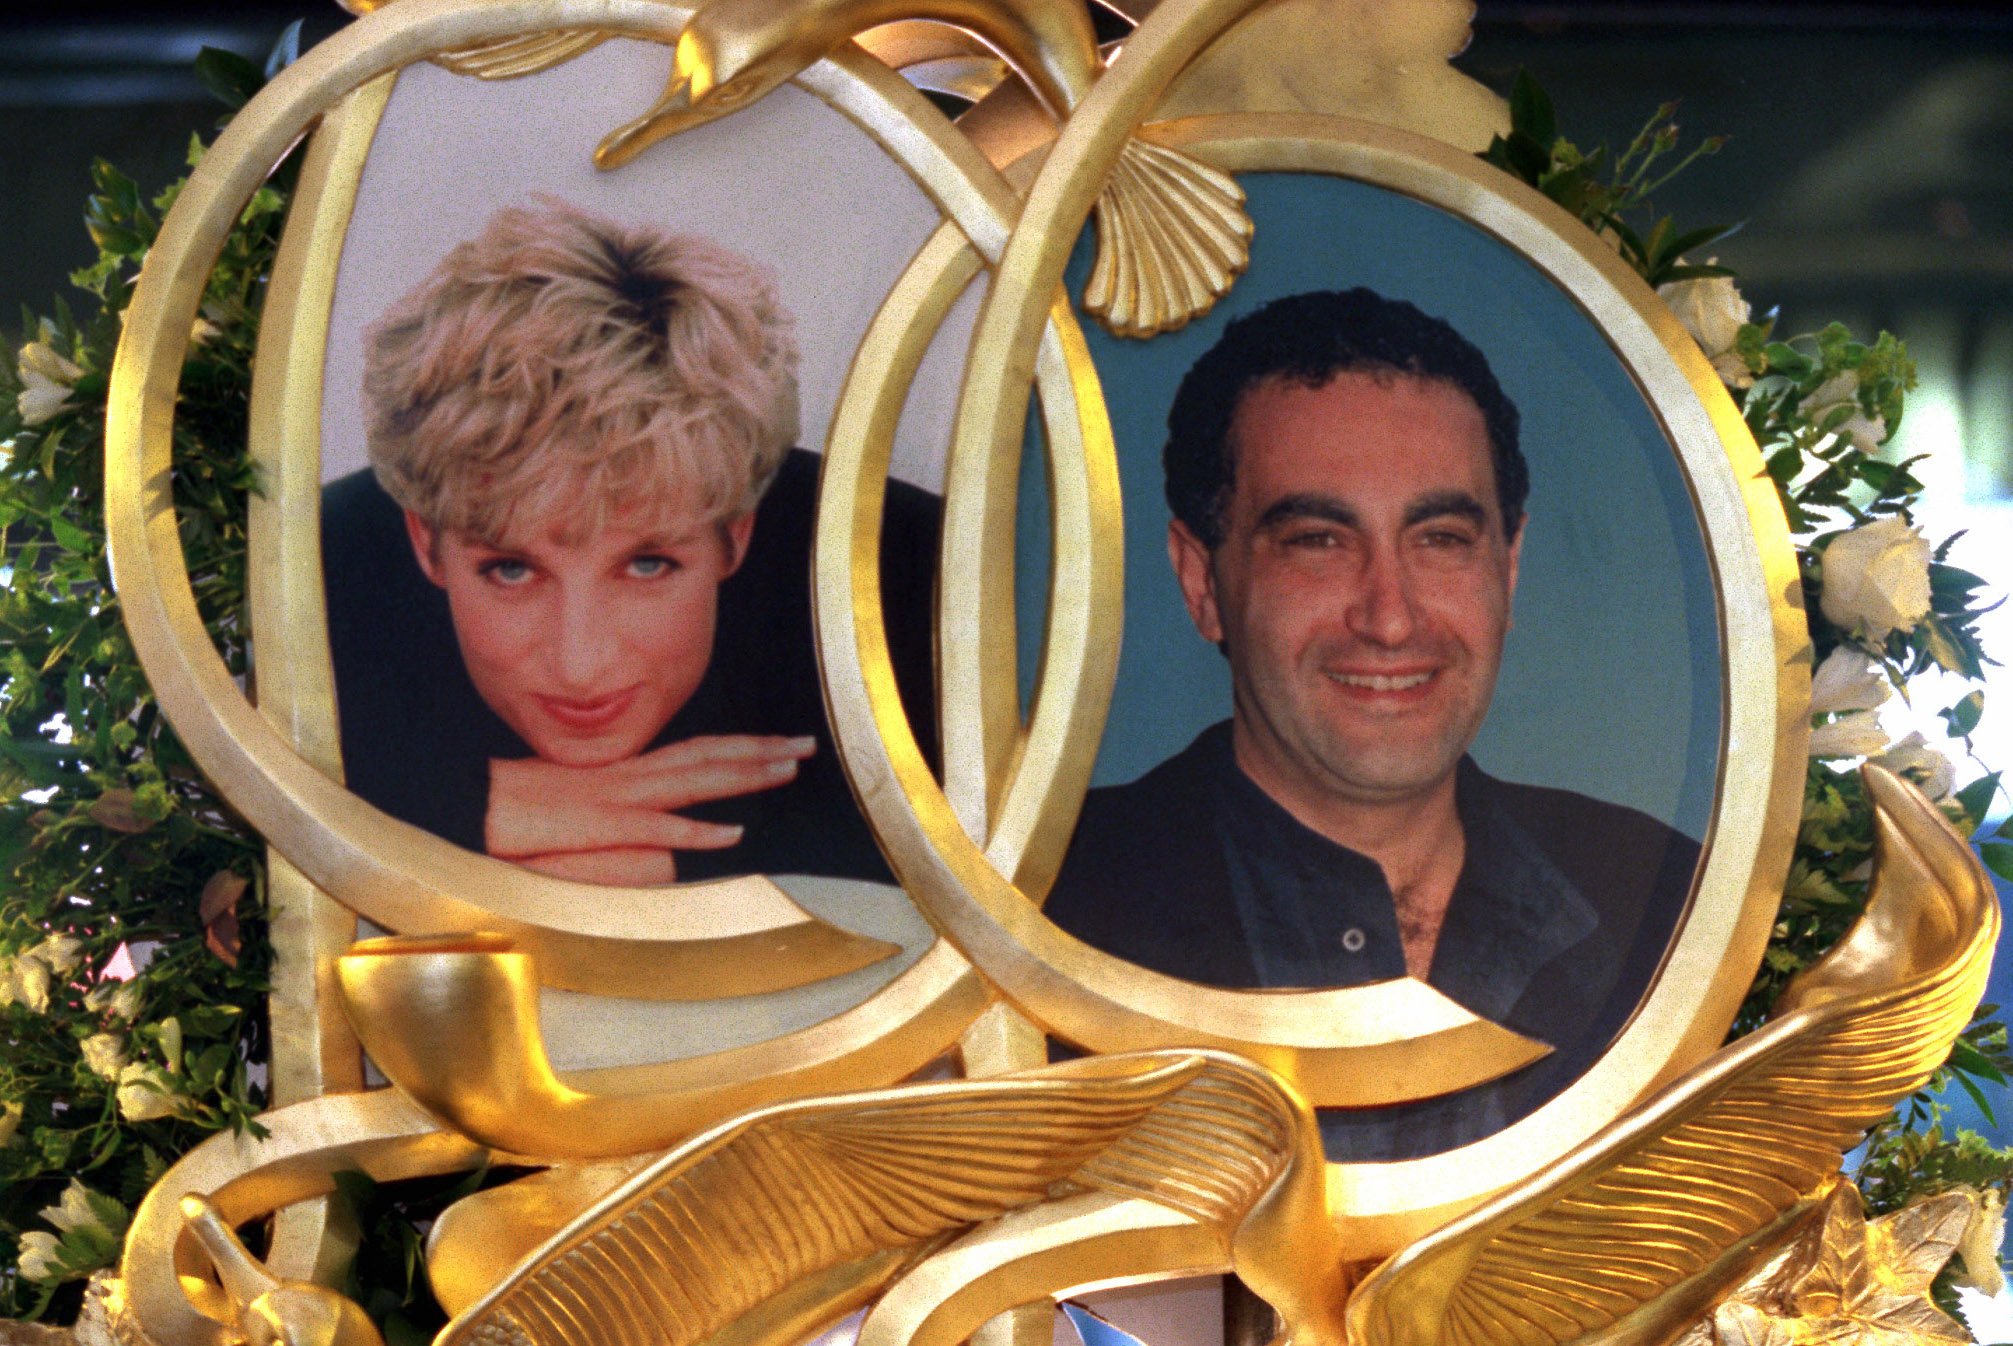 Princess Diana and Dodi Fayed, whose apartment was left the same way 20 years after his death, images incorporated into the work exhibited at Harrods